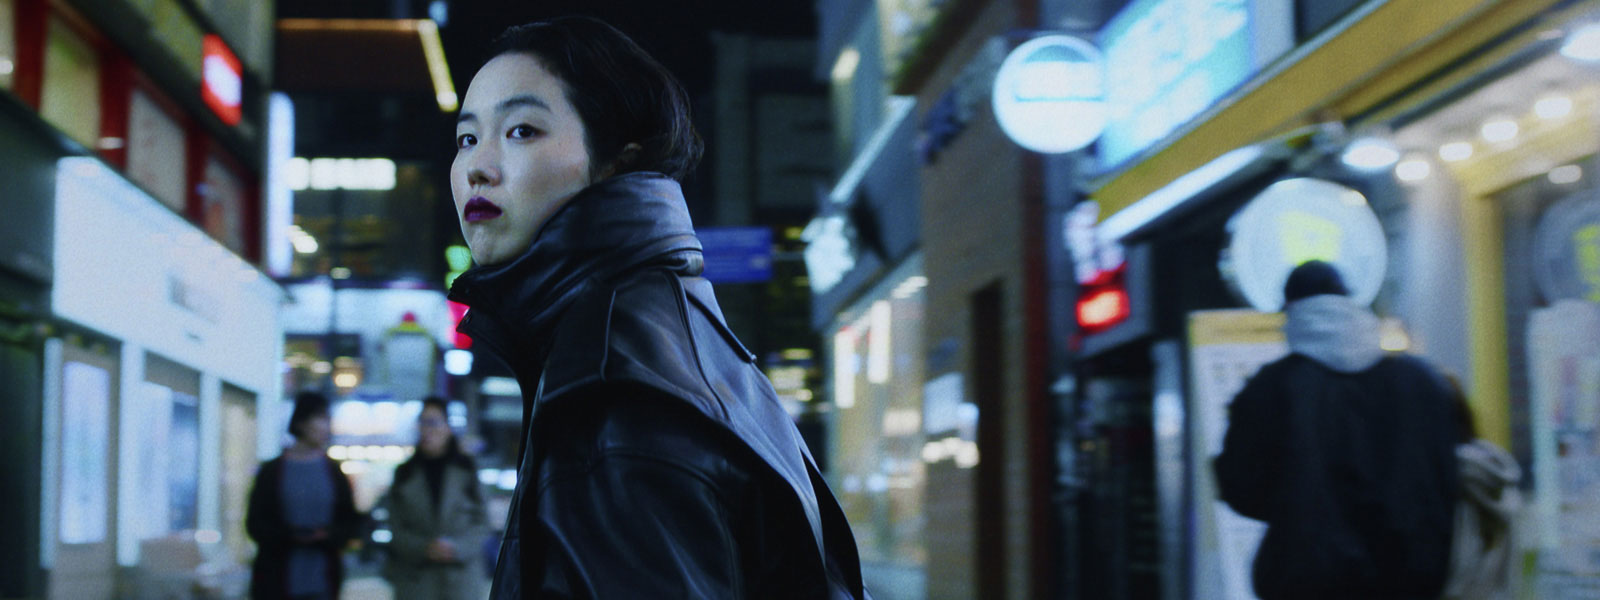 Image from 'Return to Seoul'